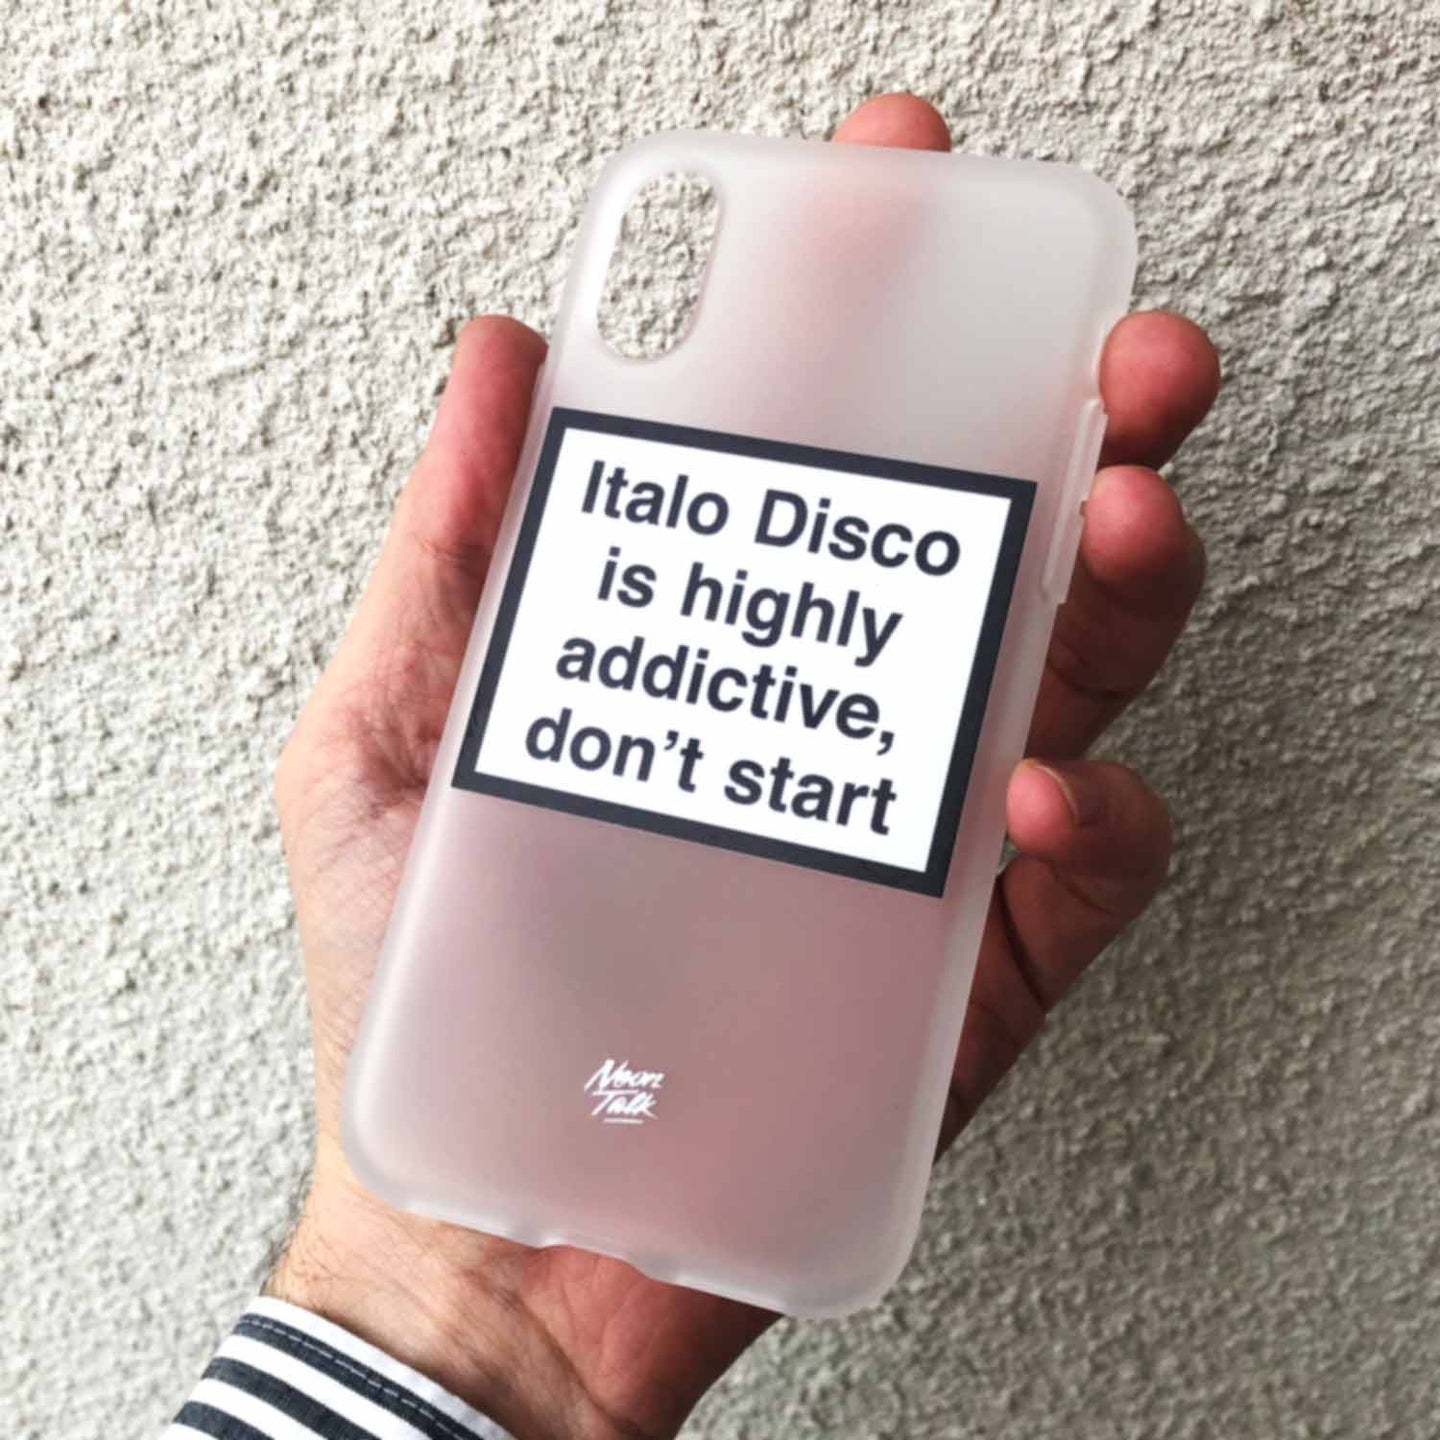 Italo Disco is Highly addictive, don't start. Metamessage Phone Case.